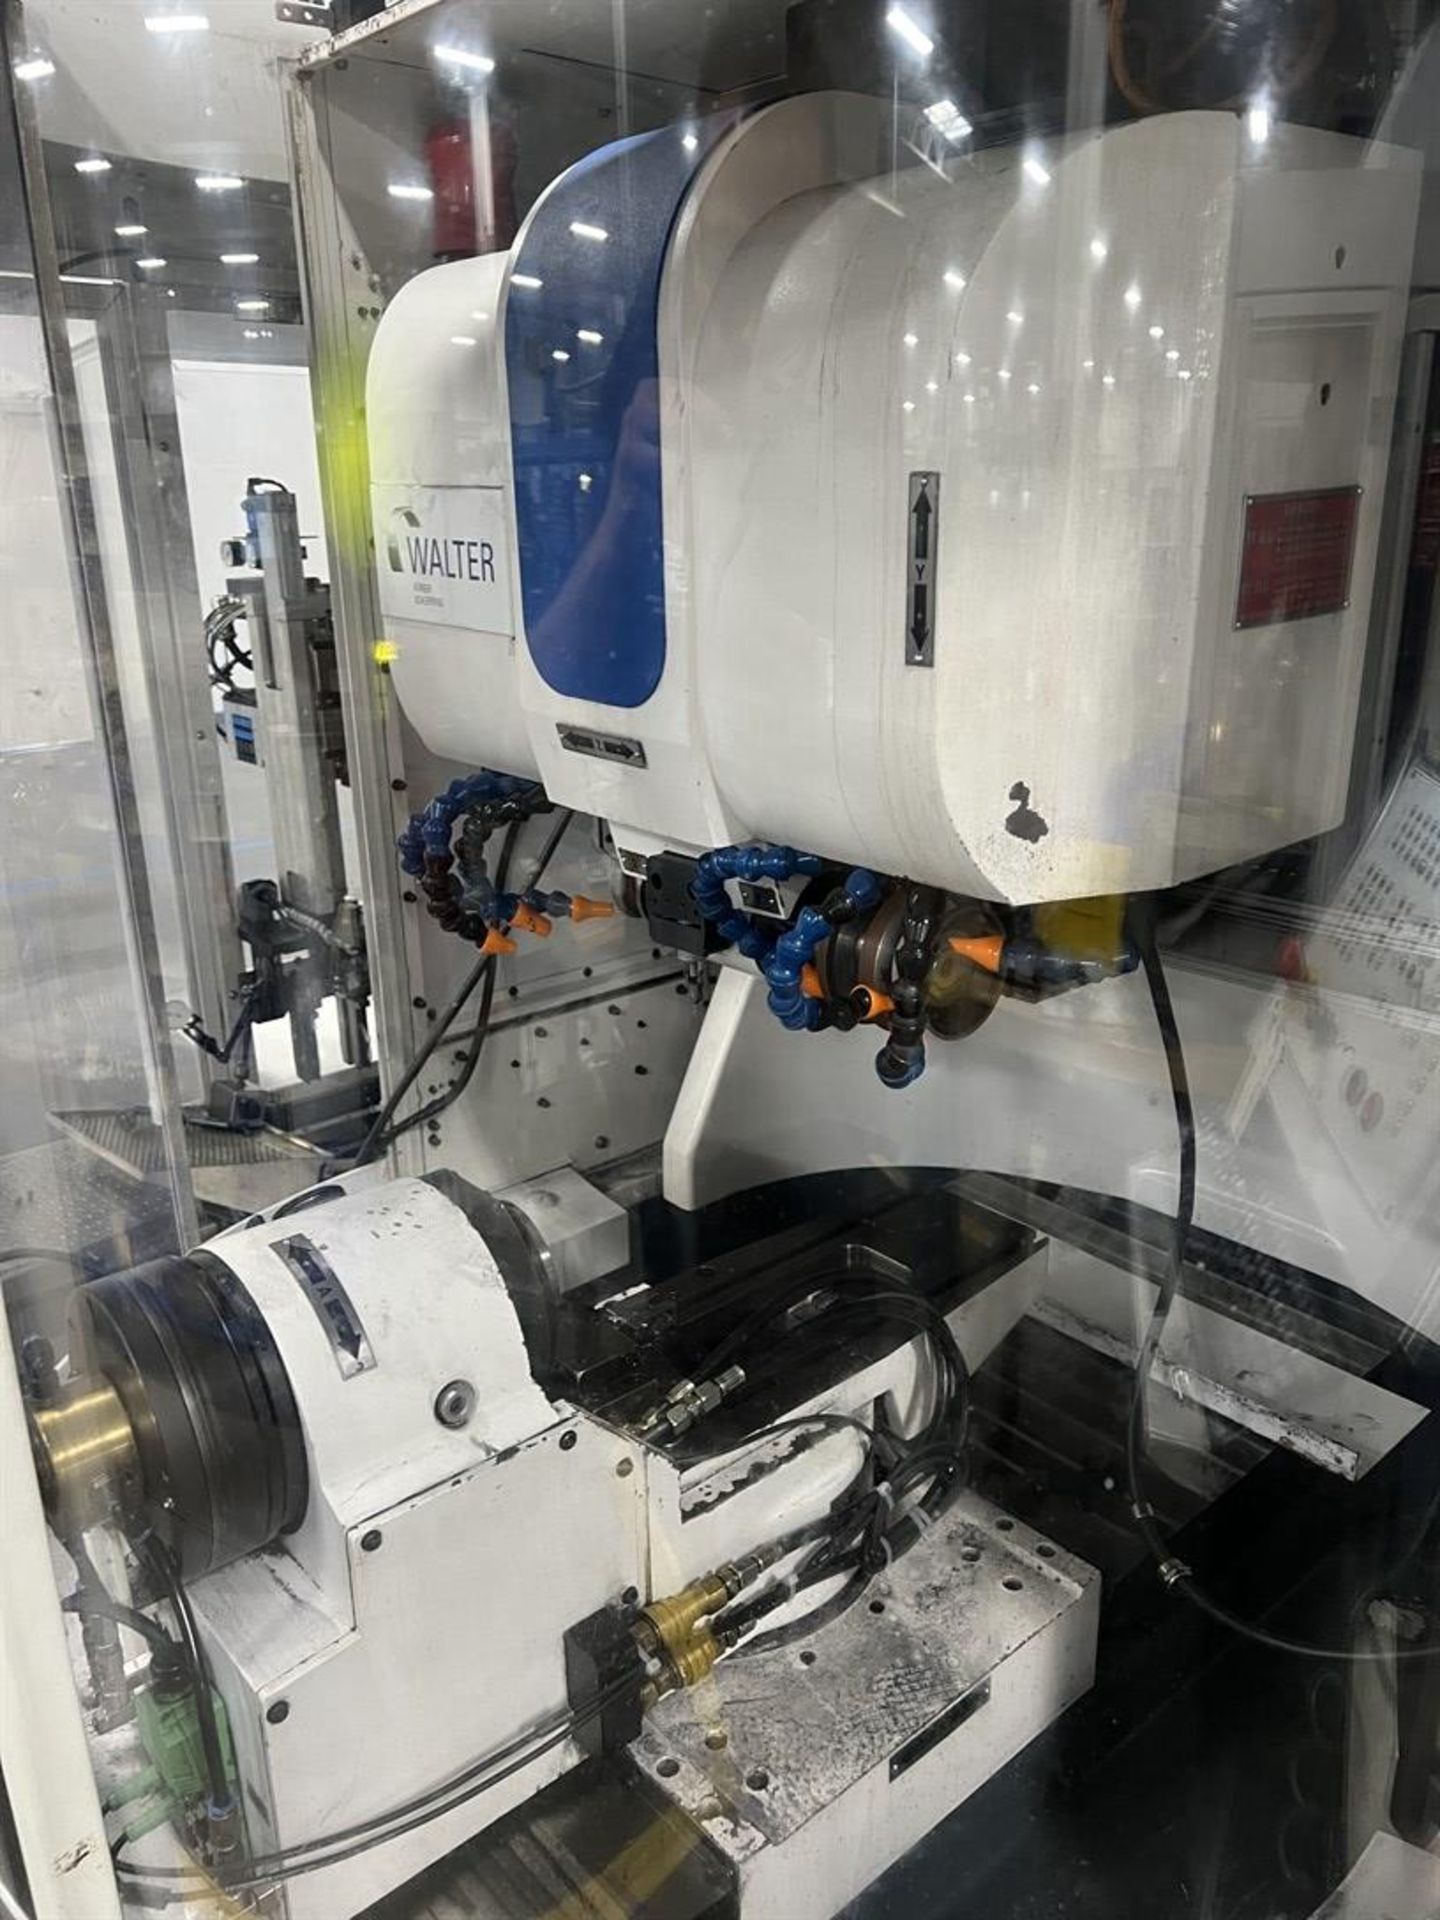 2007 WALTER Helitronic Mini Power CNC 7-Axis Tool & Cutter Grinder, s/n 663110, HMC 600 Control, - Image 8 of 13